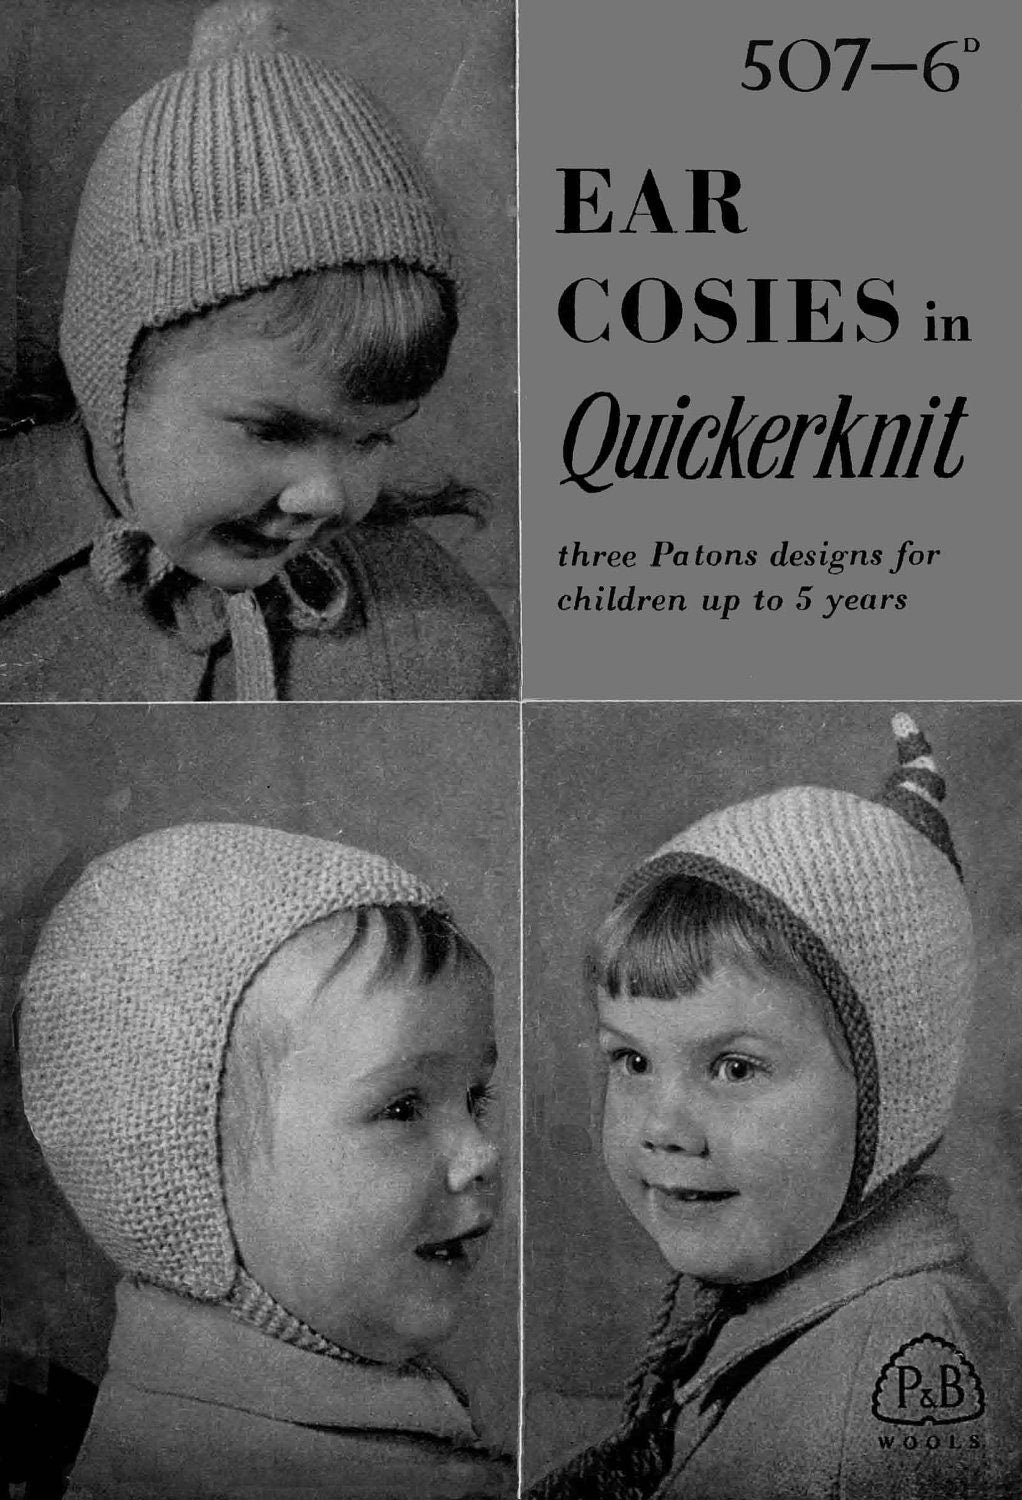 Childrens Ear Cosie Hats in 3 Styles for Children Up To 5 Years, Sport weight wool, 50s Knitting Pattern, P&B 507